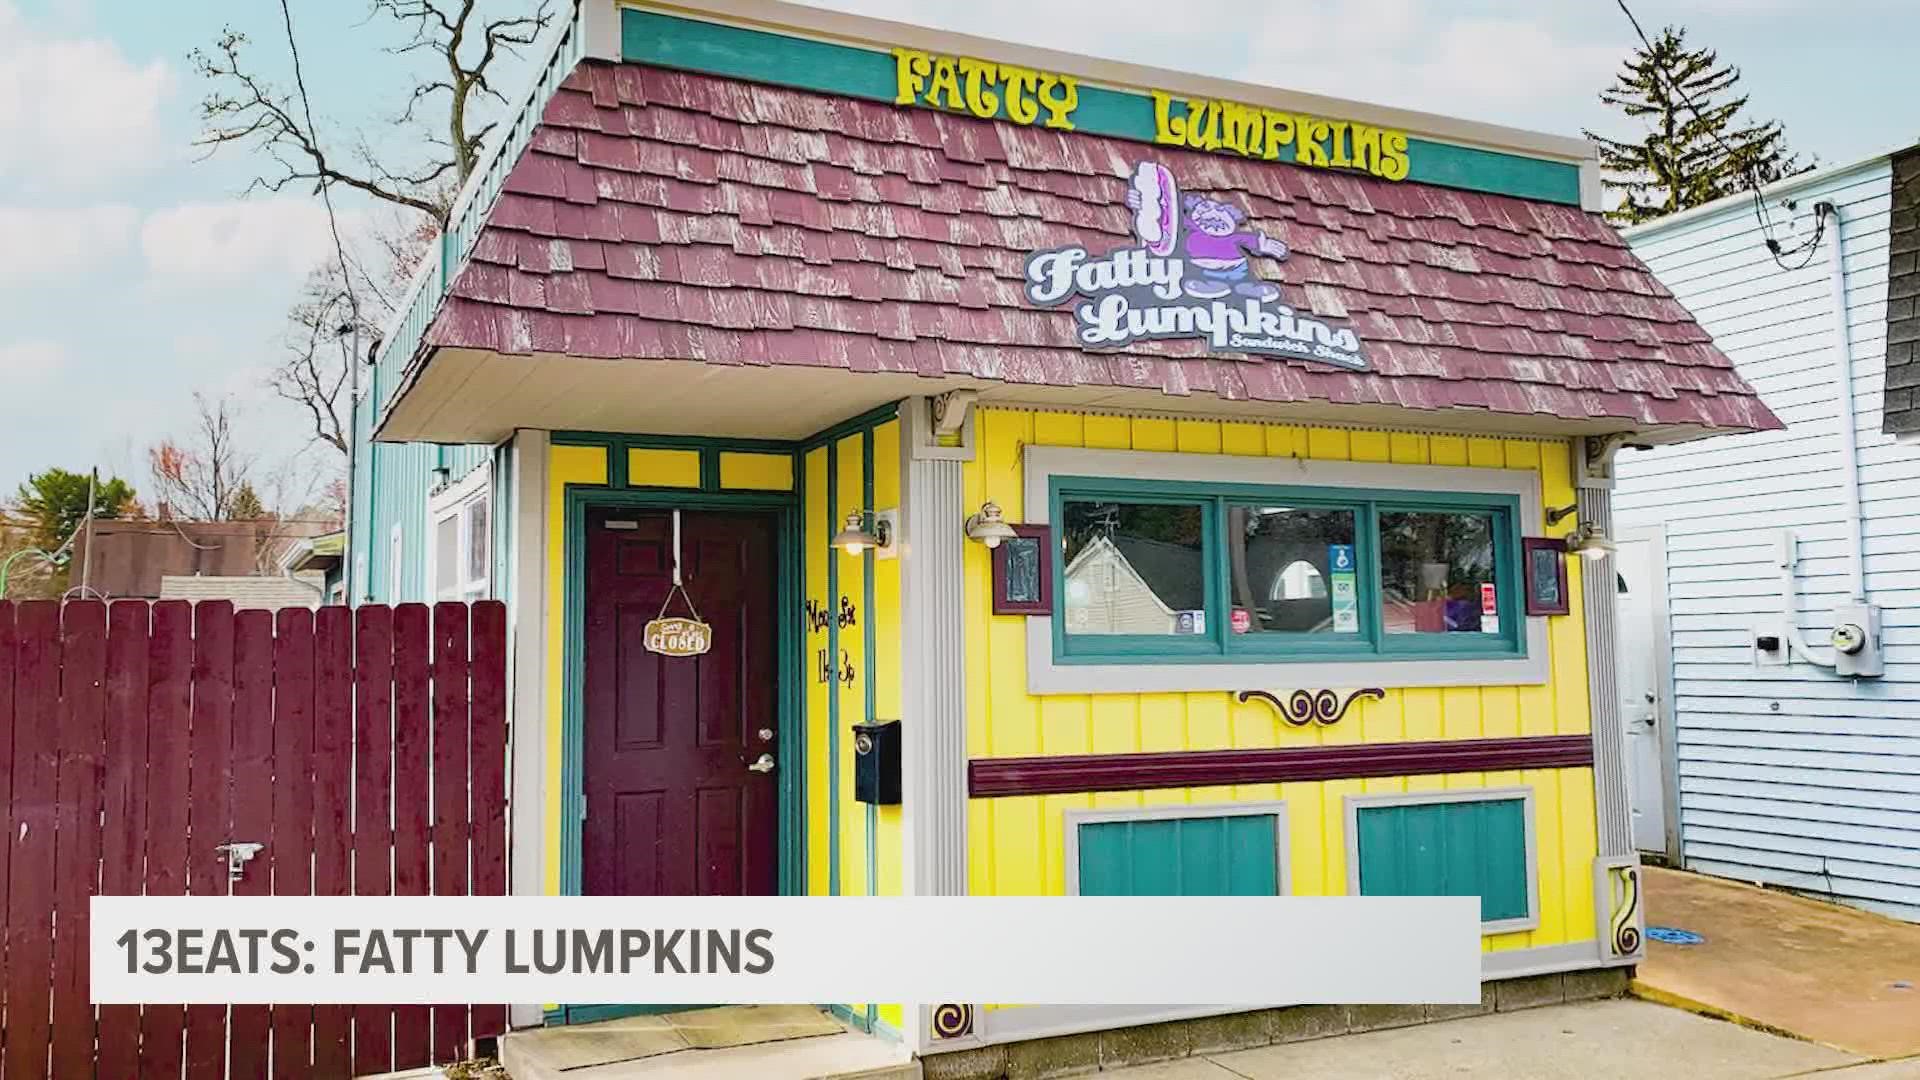 13 EATS: Fatty Lumpkins is not only family owned and operated, but done so by people who are kind, passionate and an extension of the tight-knit Muskegon community.